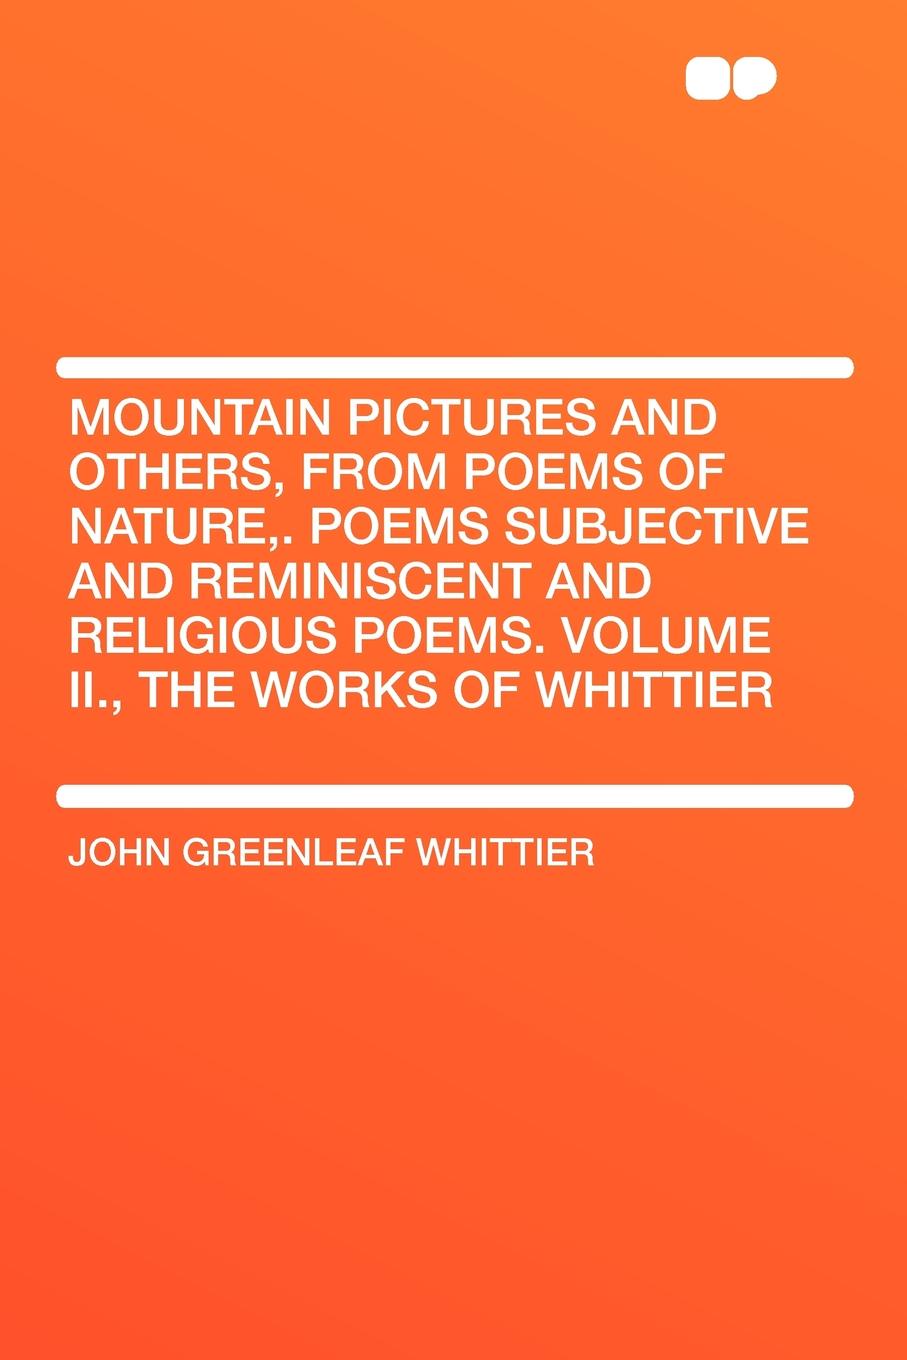 Mountain Pictures and Others, from Poems of Nature,. Poems Subjective and Reminiscent and Religious Poems. Volume II., the Works of Whittier